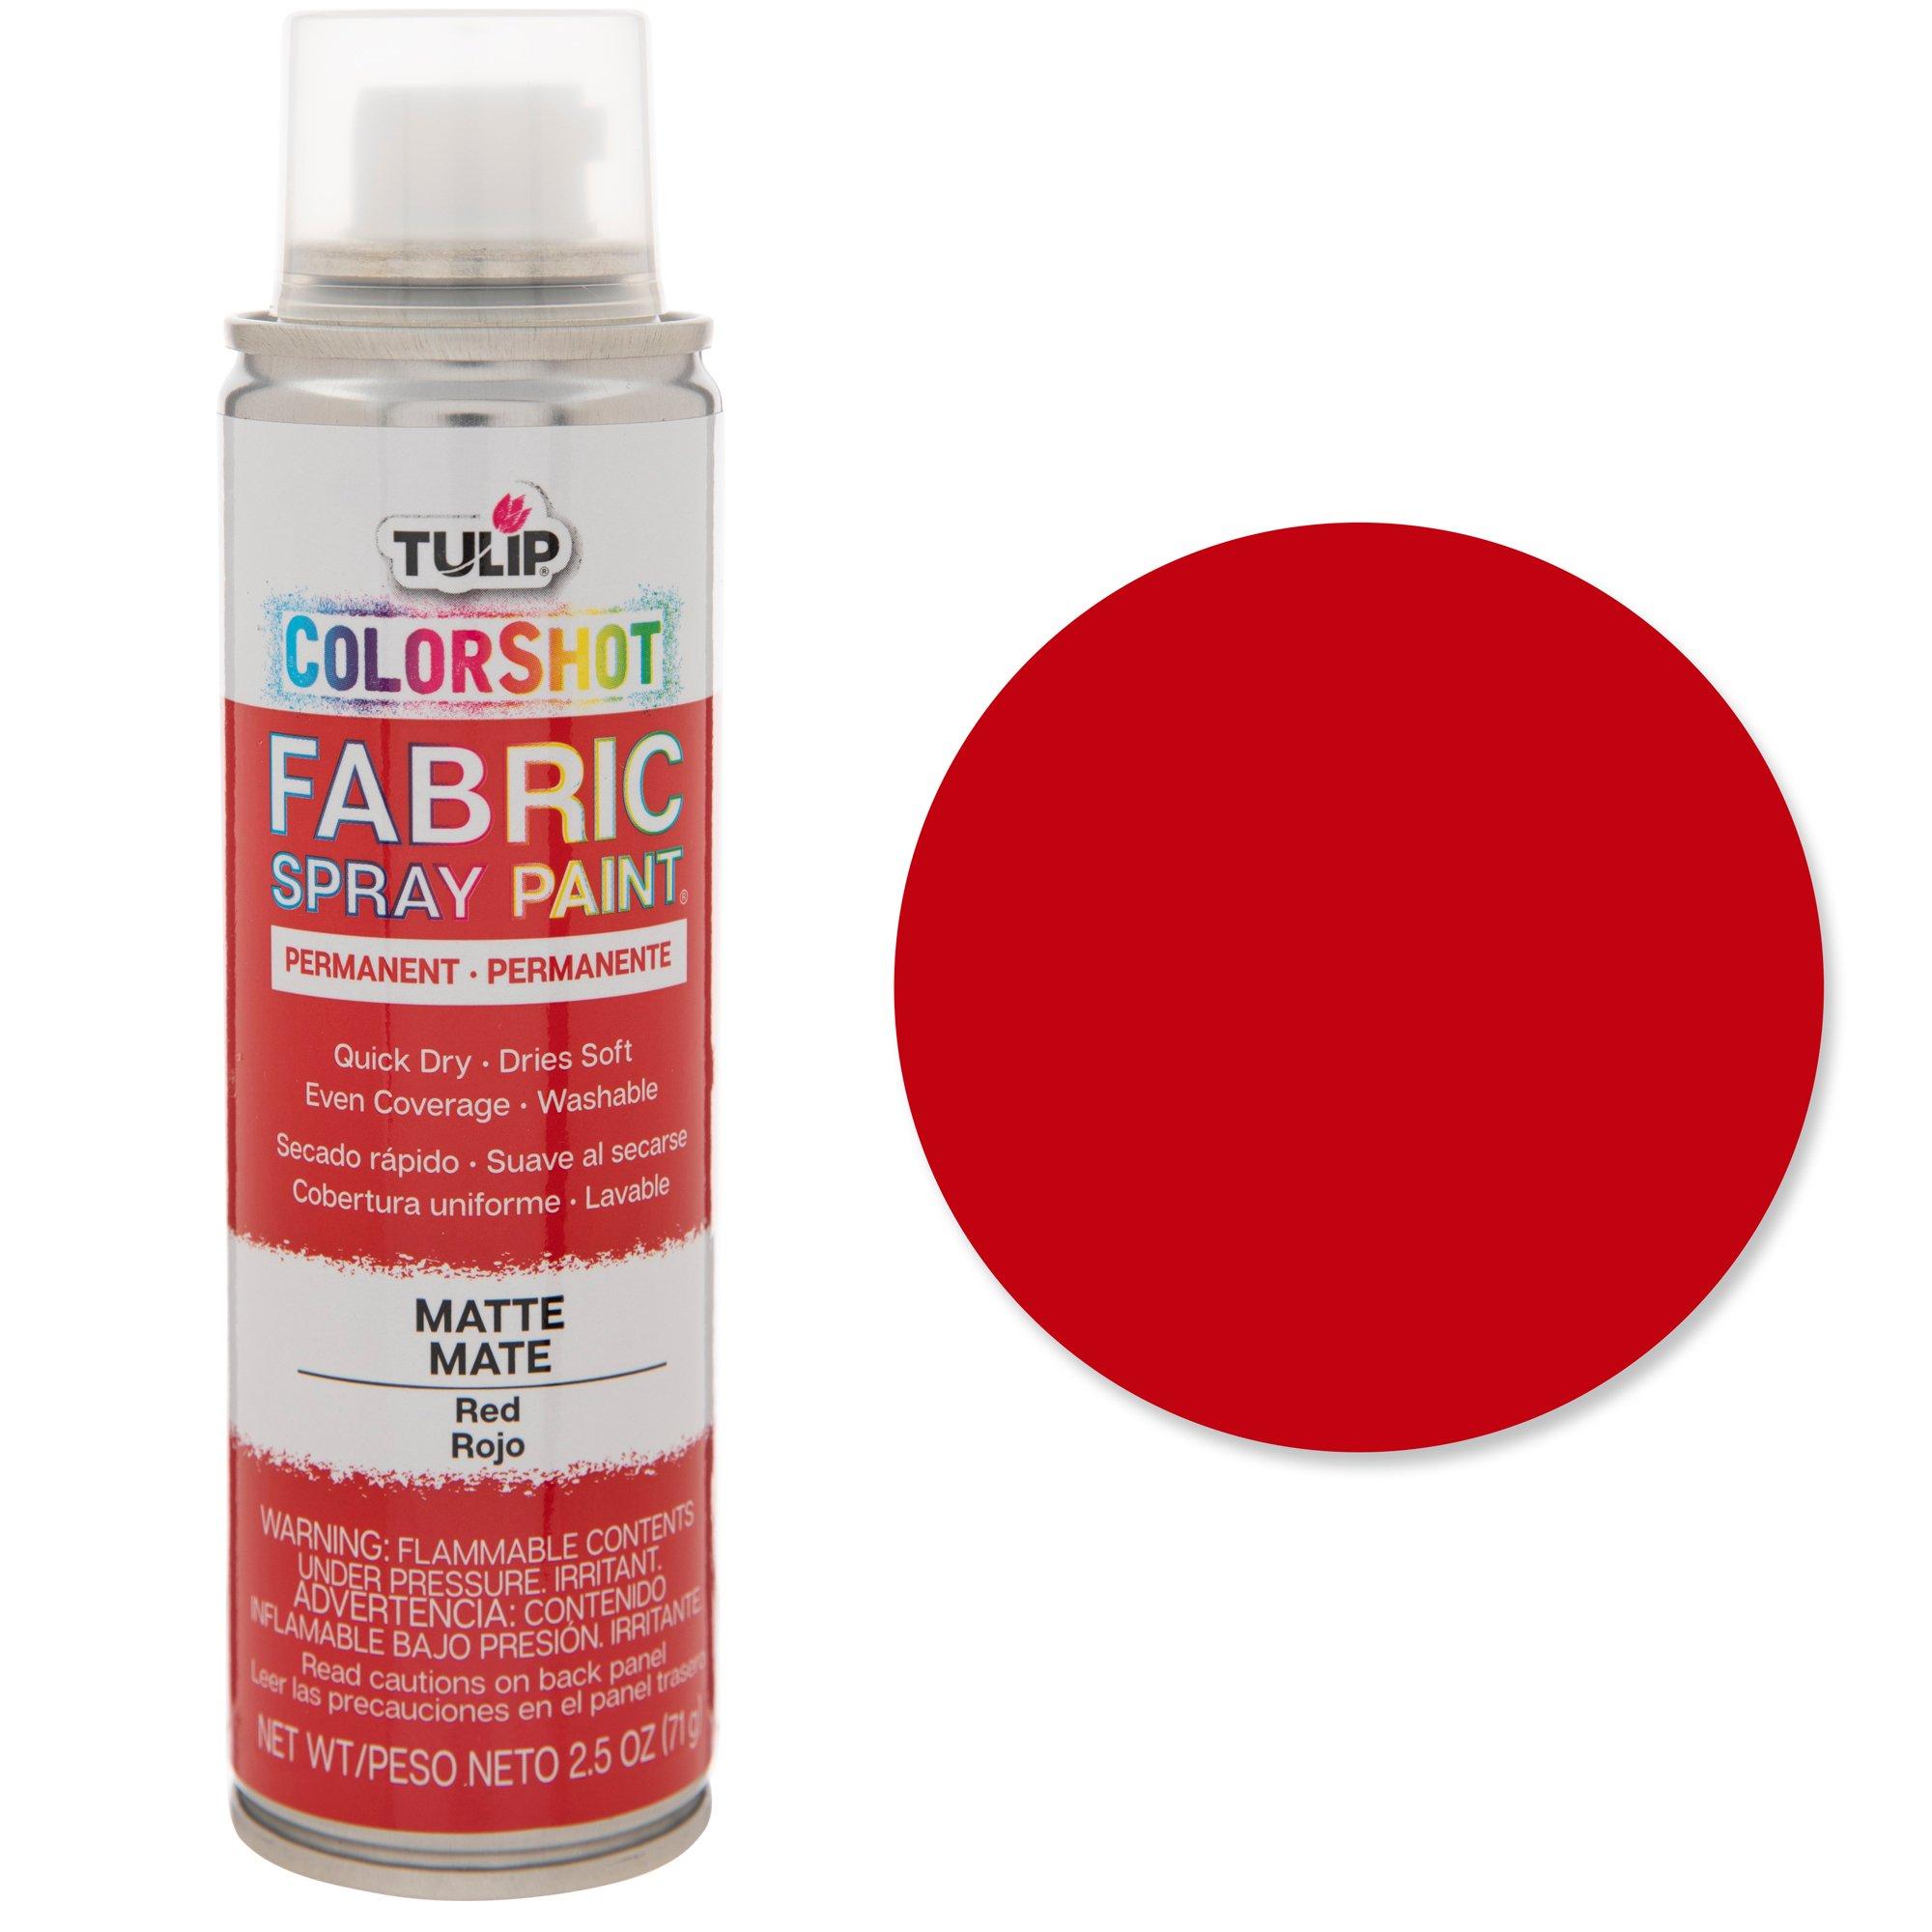 Fabric Spray Paint Simply Spray Upholstery Dye is your best source